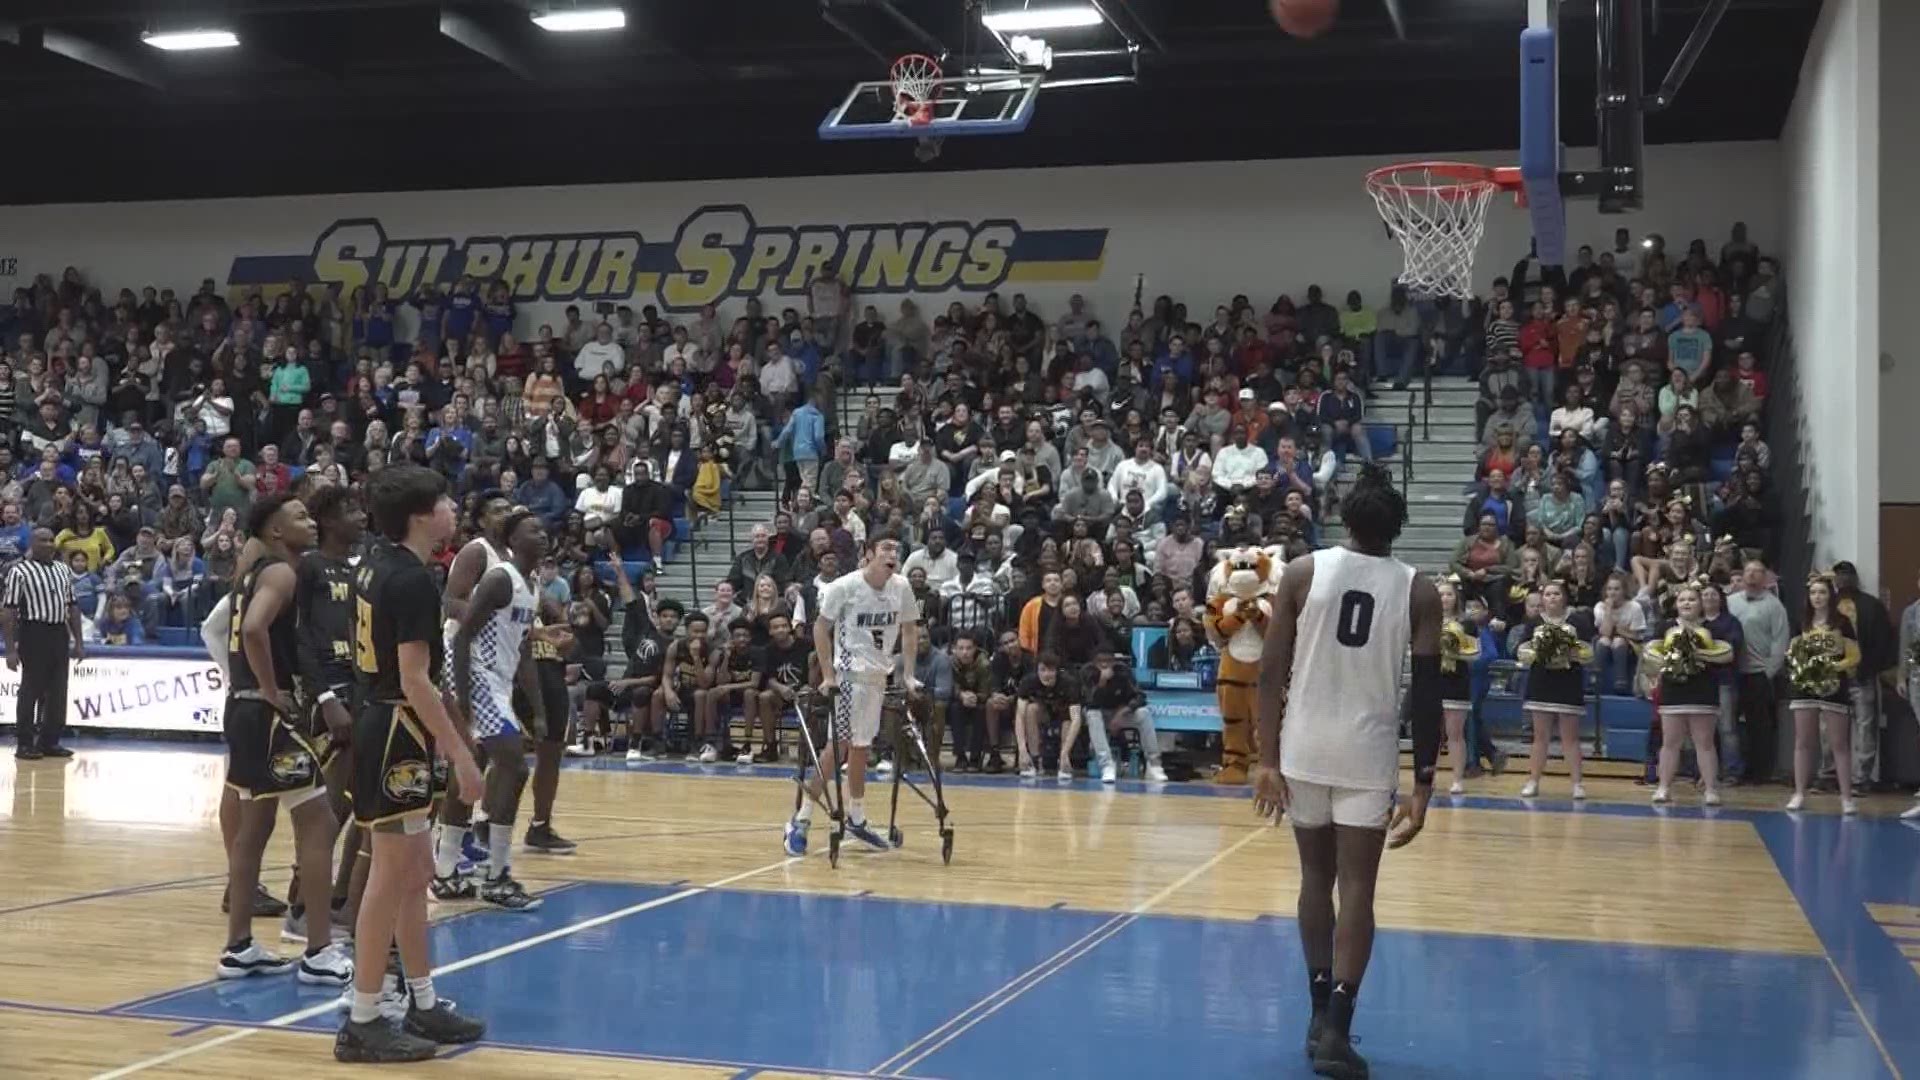 Basketball player with cerebral palsy scores opening basket of the night at Sulphur Springs High School.